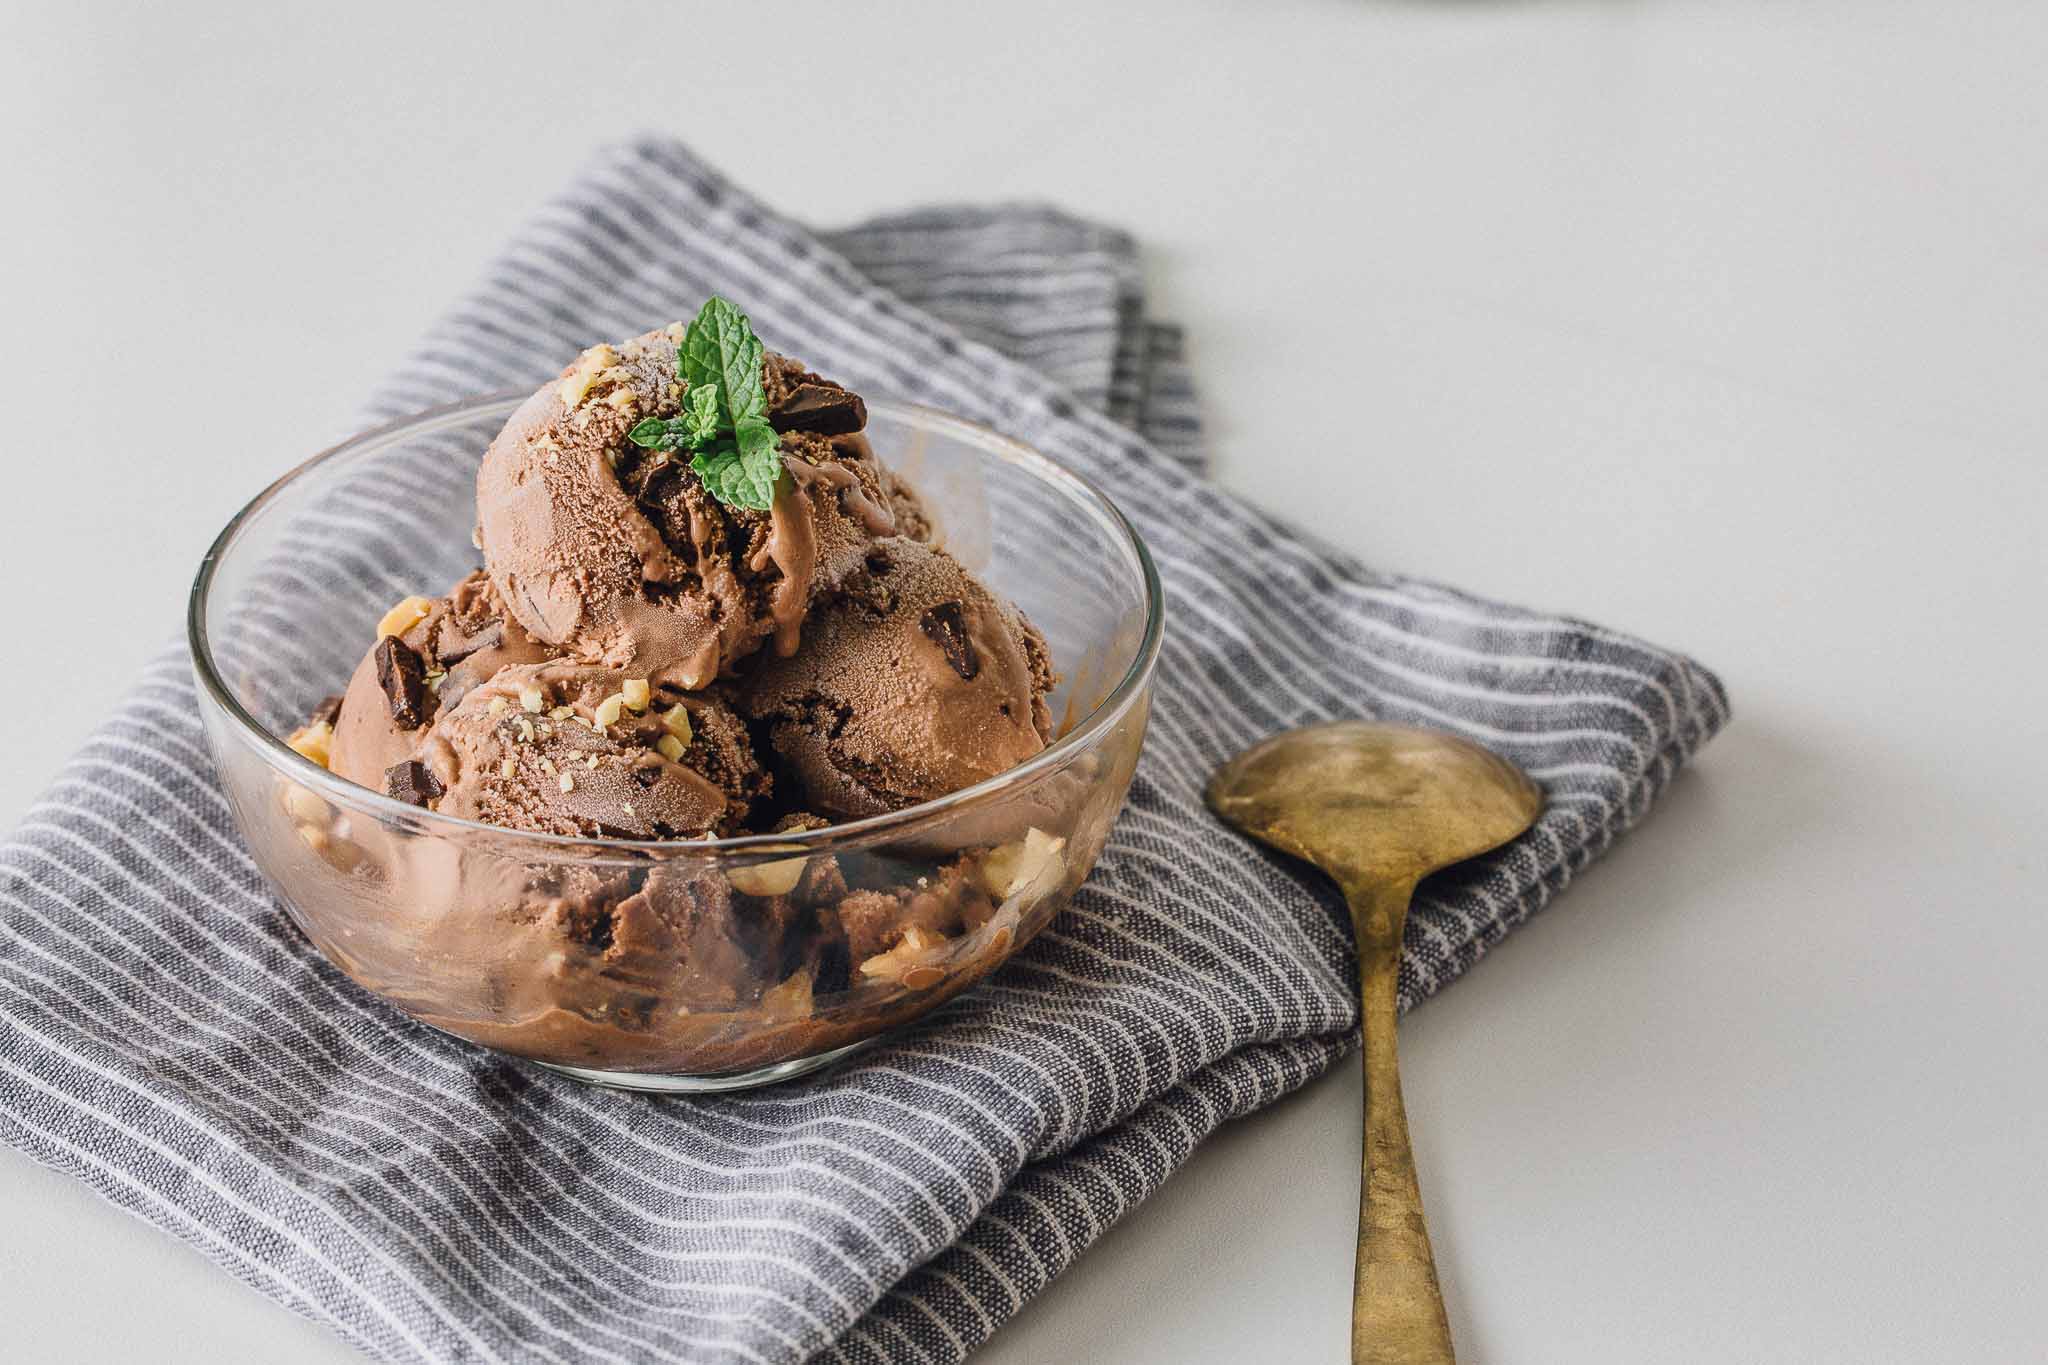 Chocolate Peanut Butter Blender Ice Cream: A heathier take on a classic dessert, this no-churn, dairy-free ice cream will be the cherry on top of your day!